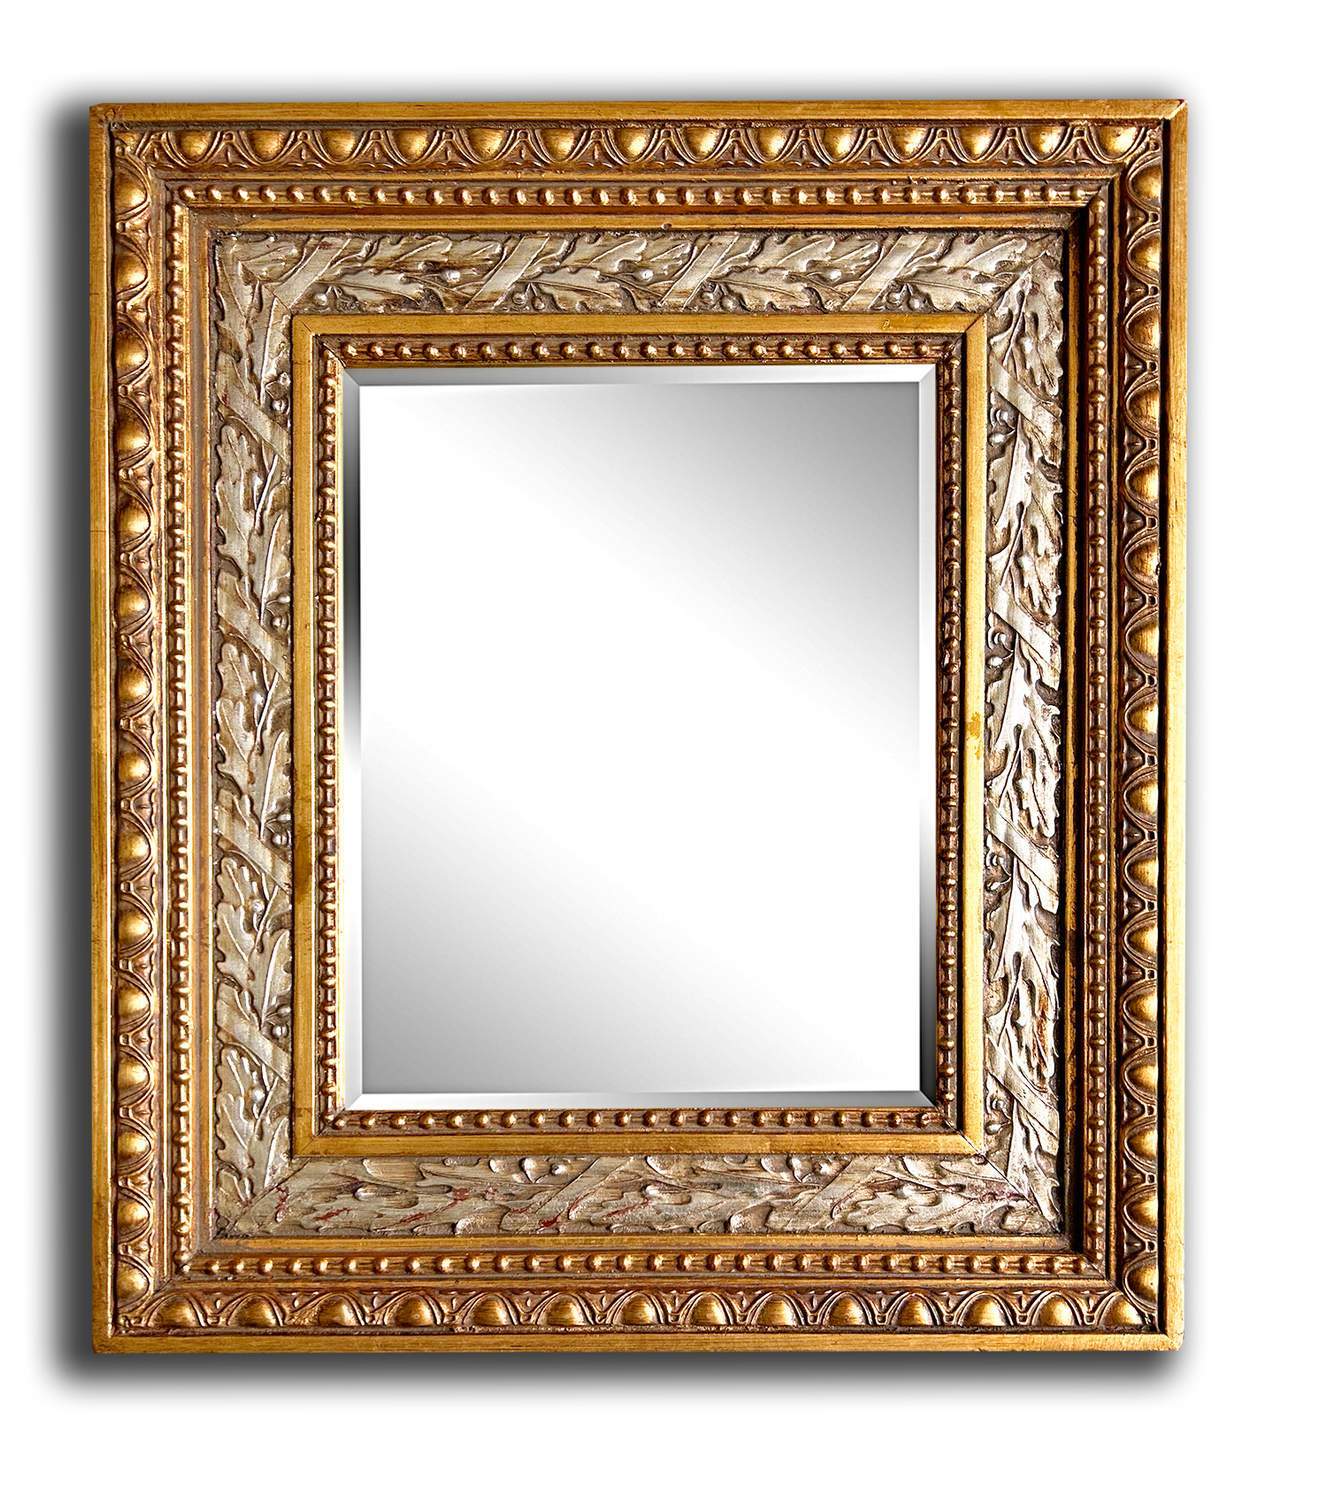 Mirror 20x25 cm or 8x10 ins, wooden photo frame